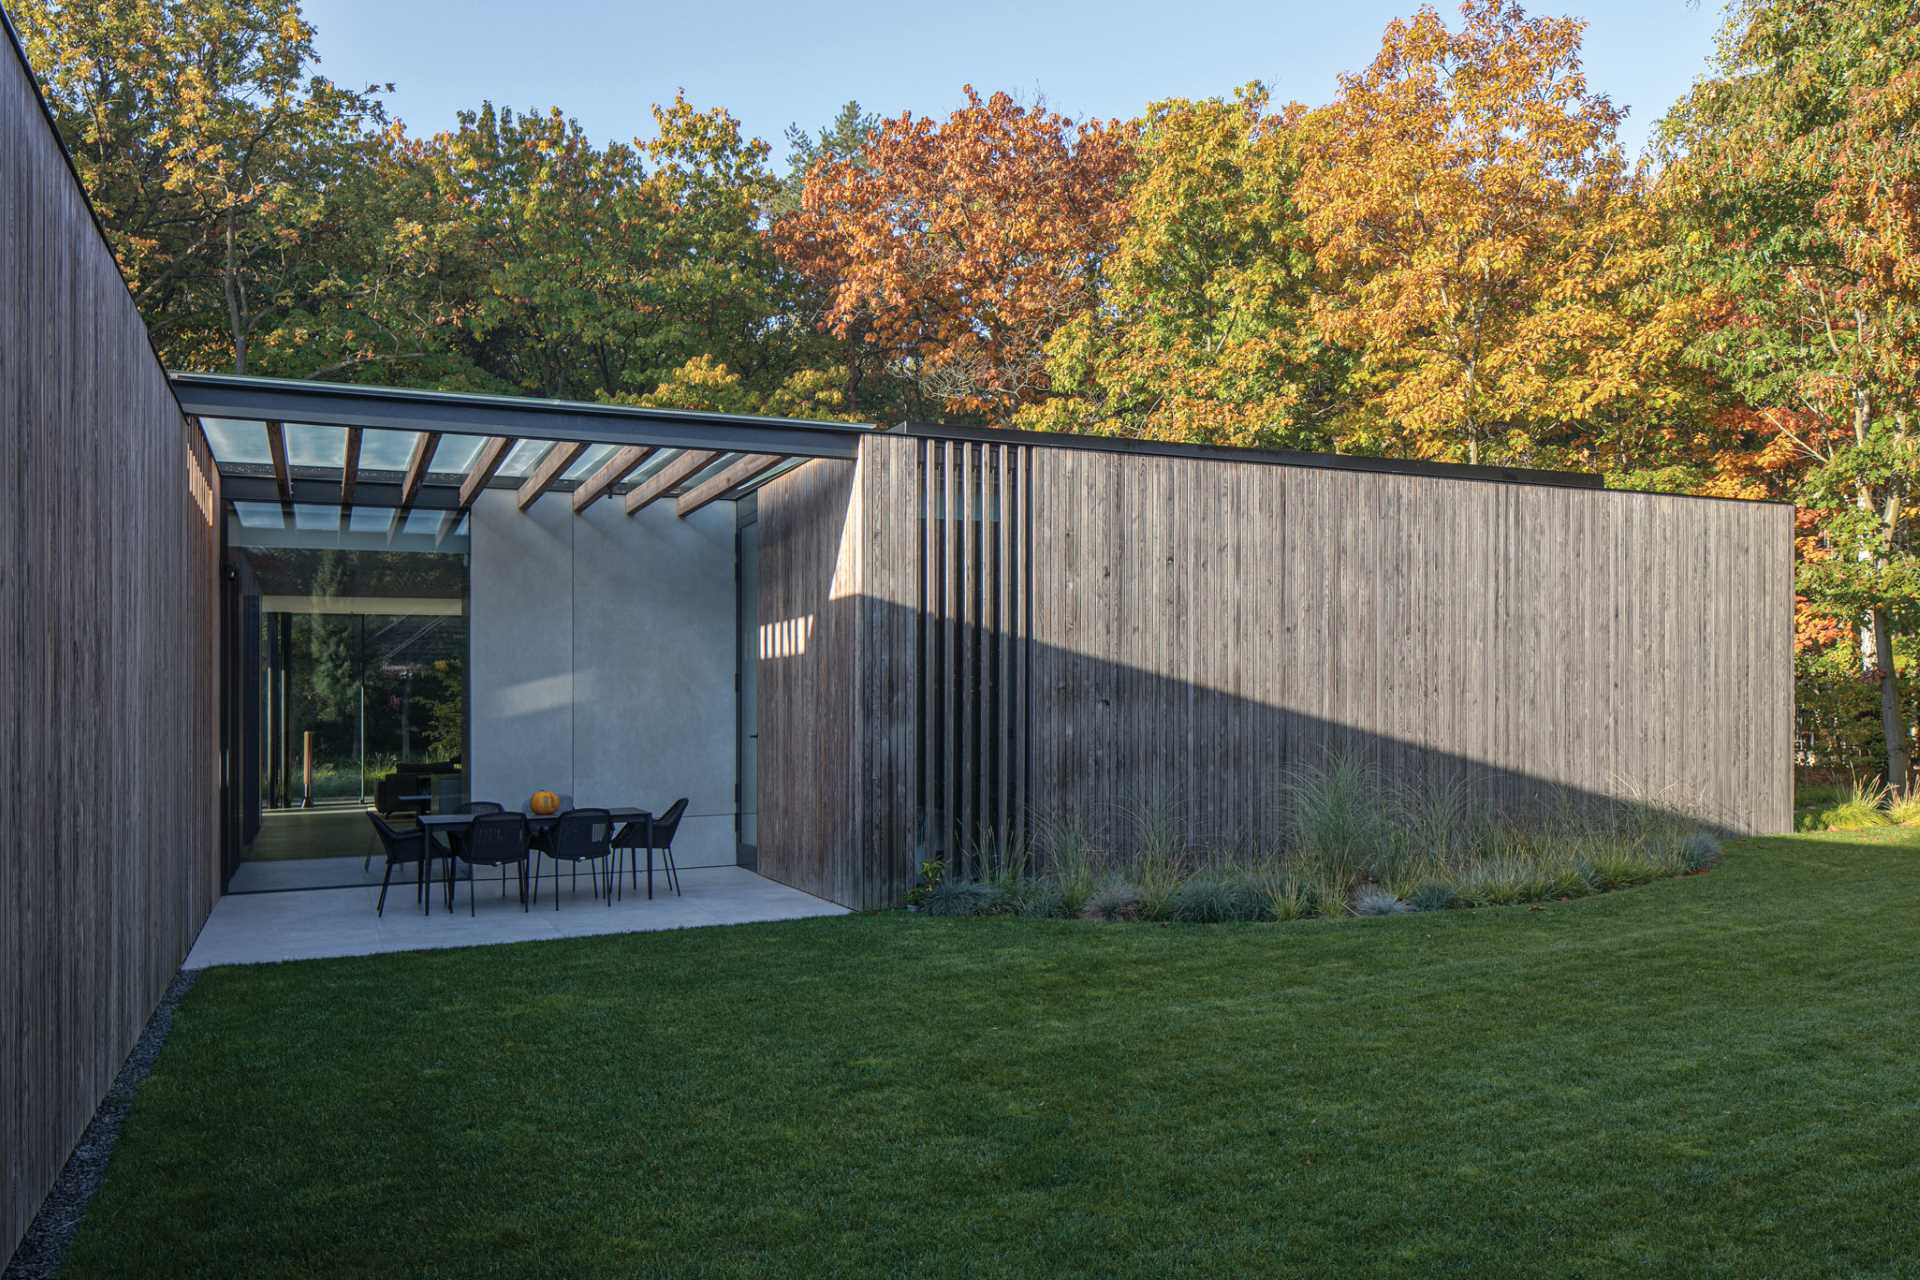 The wood siding wraps around from the facade to the side and rear of the home, with some sections missing the wood to allow the natural light to pass through to the interior spaces.